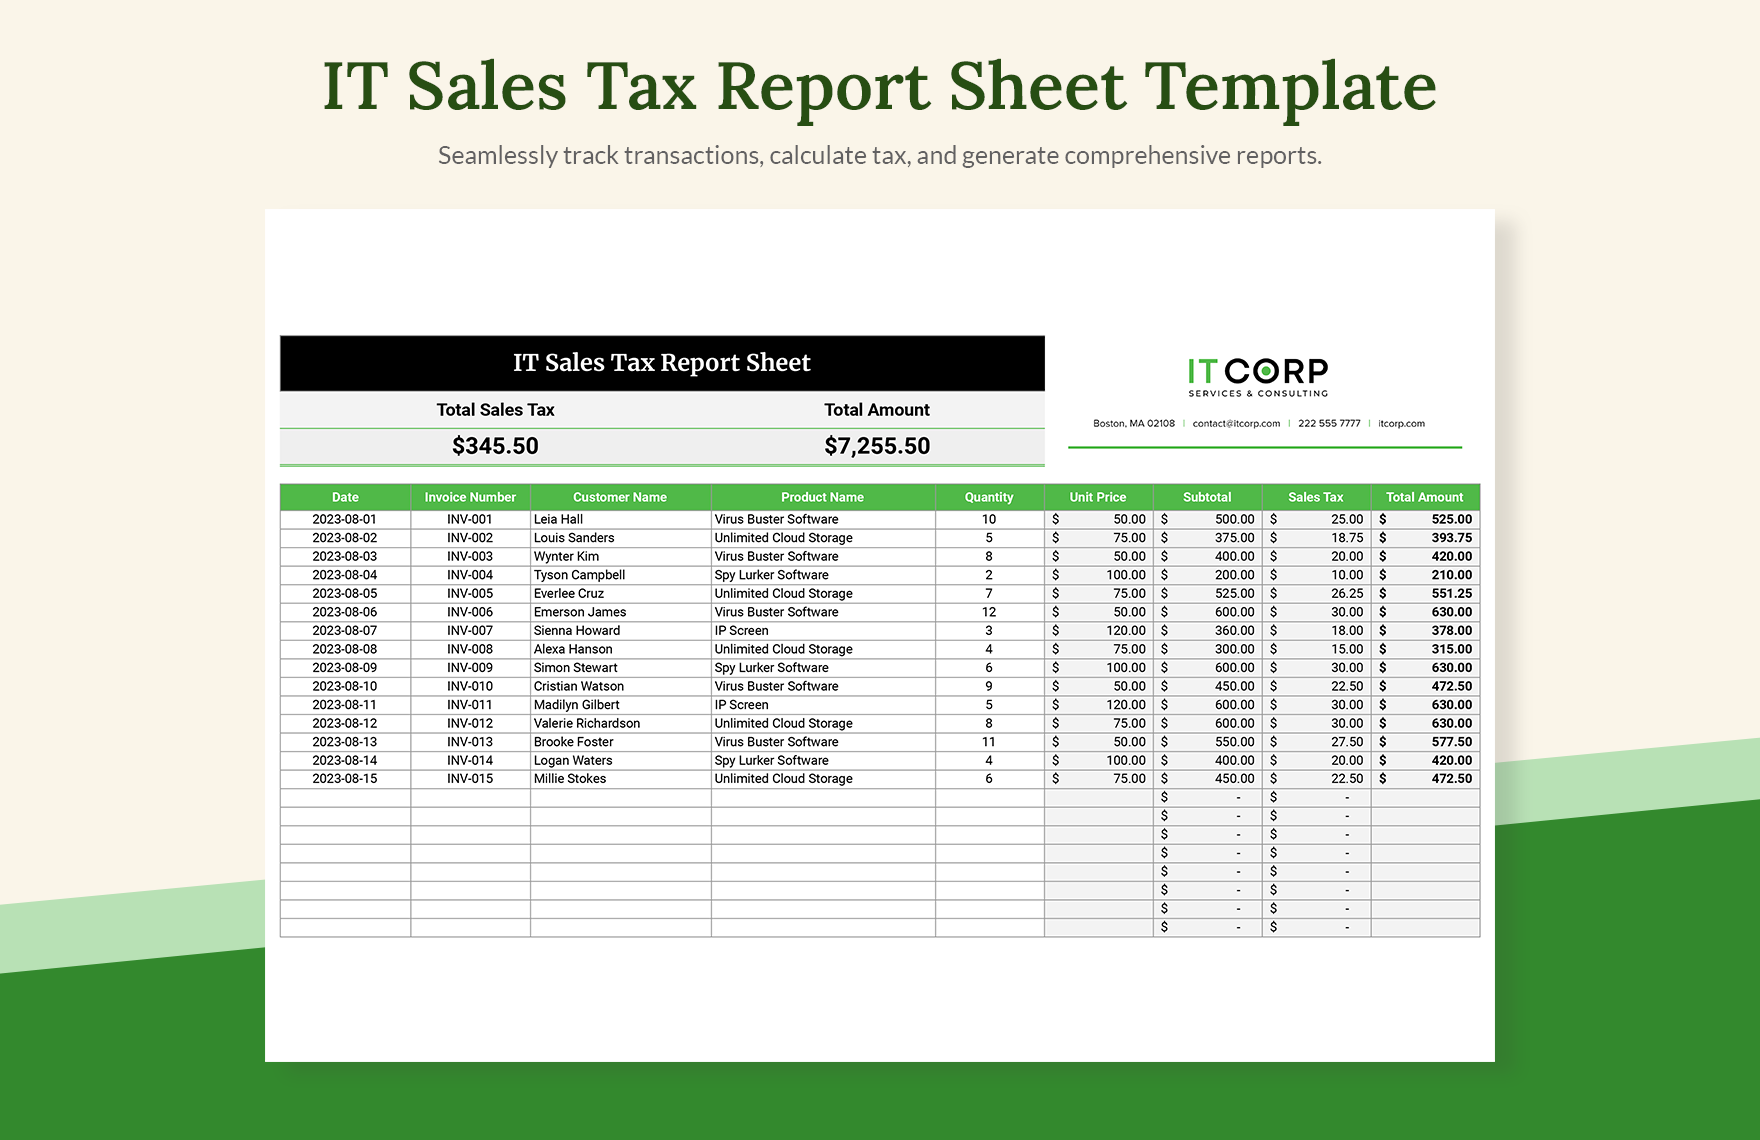 IT Sales Tax Report Sheet Template in Excel, Google Sheets